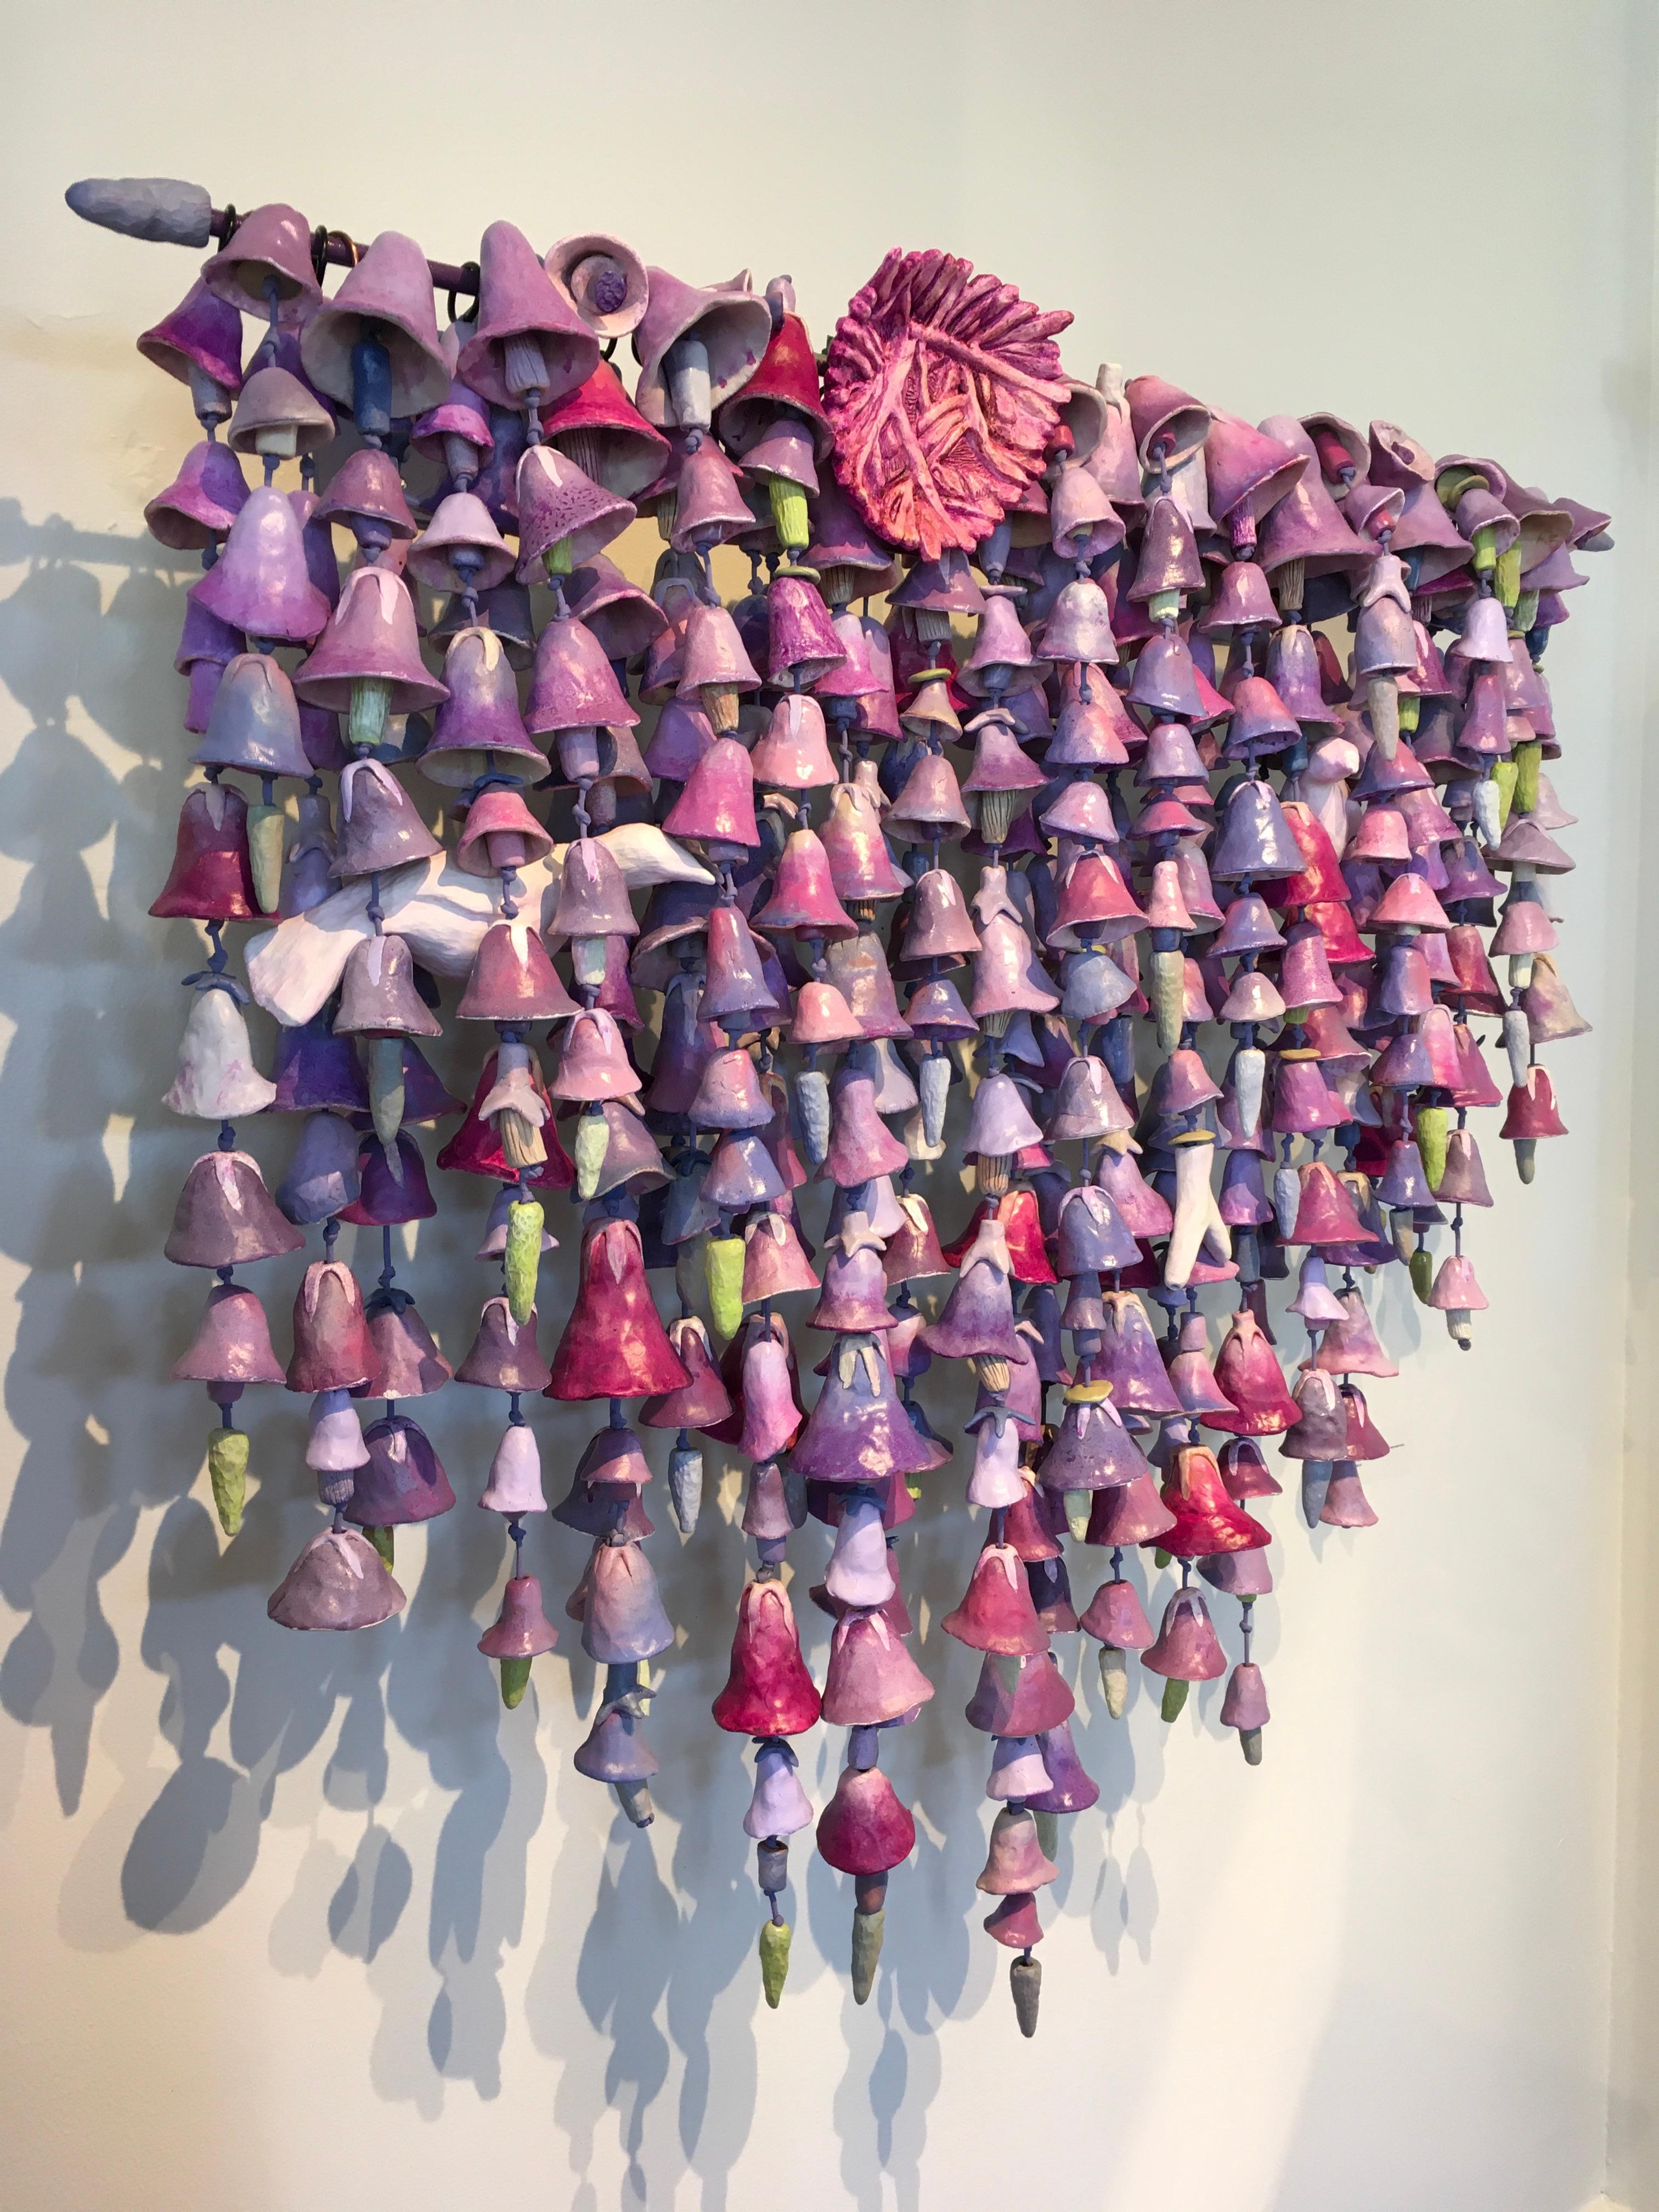 This ceramic sculpture, 'A Safe Place to Stay, by Paul Medina comprises many strands of fired-clay forms linked by nylon cord that hang from a steel rod bracketed to the wall. 
Shades of lavender, pink, gray and green are the predominant colors of